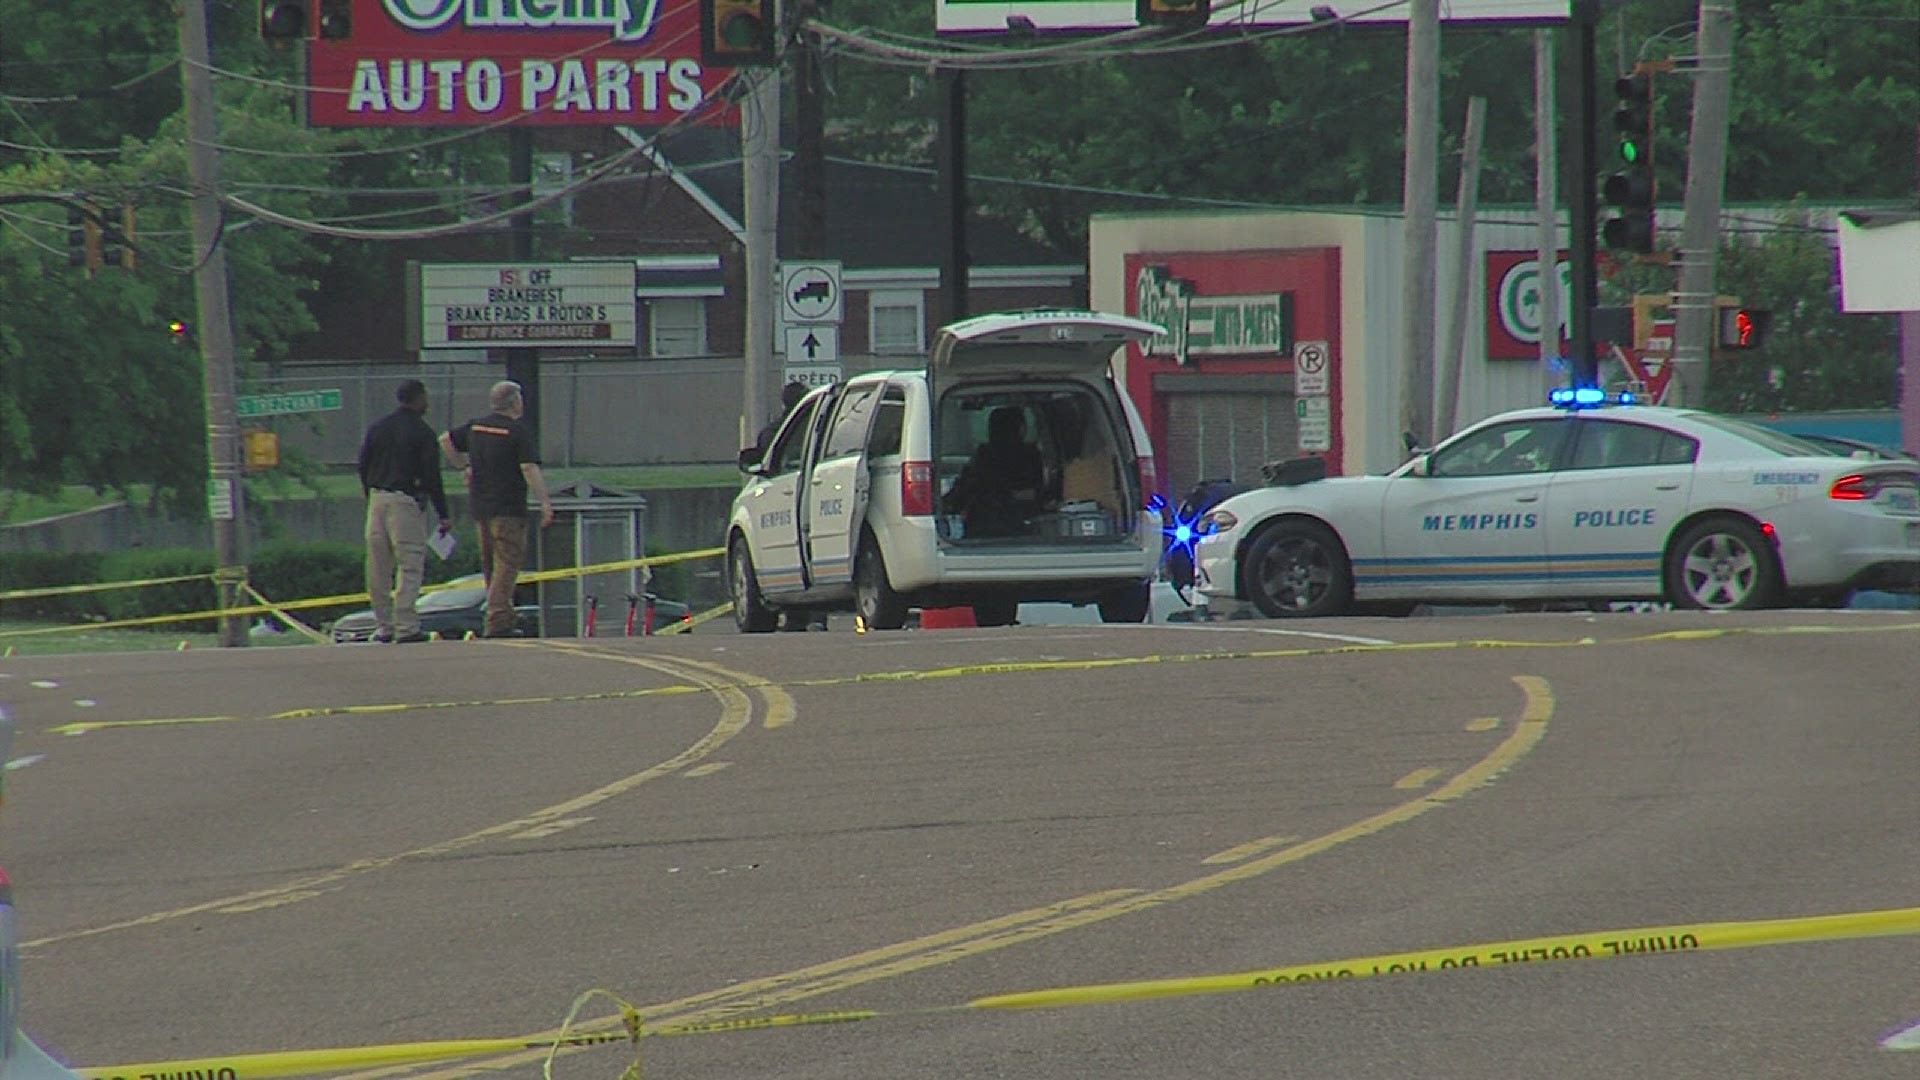 According to the Memphis Police Department, the shooting happened around 1:30 at Airways and Lamar.